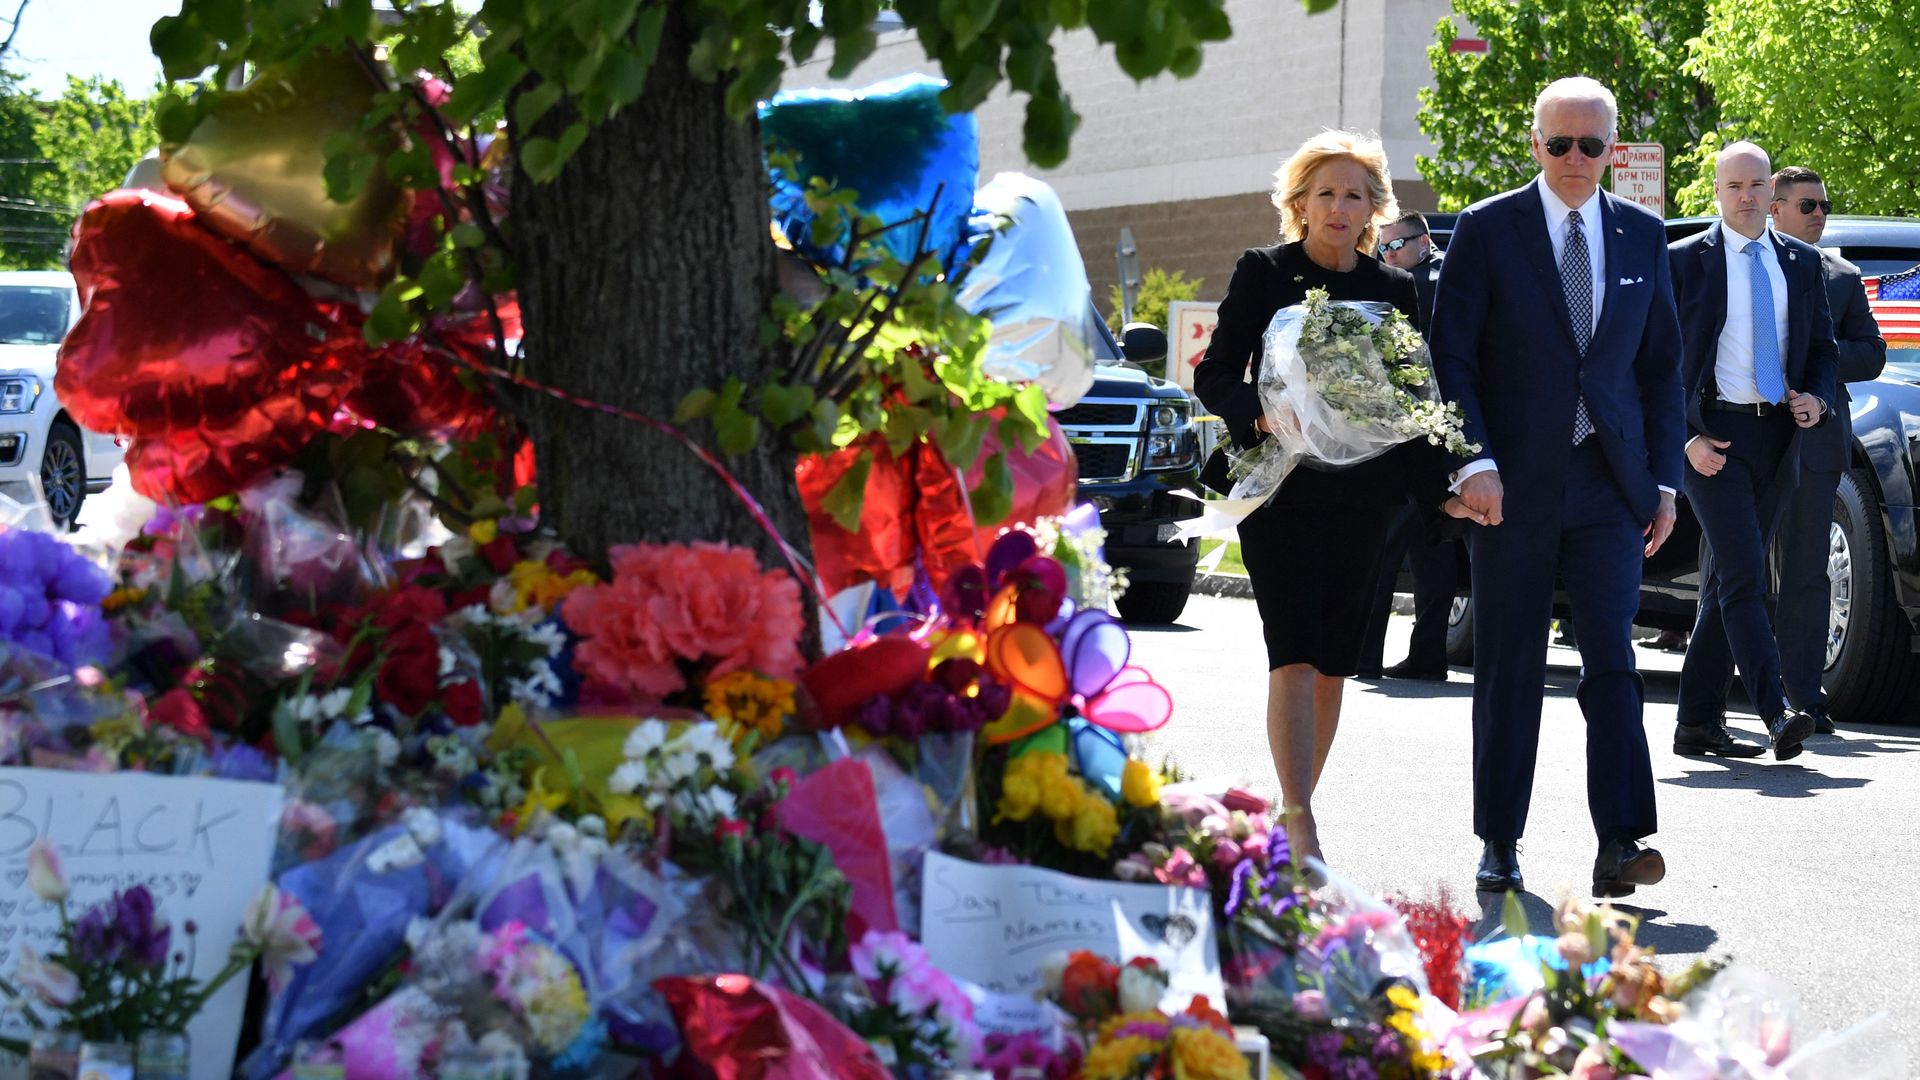 President Joe Biden and US First Lady Jill Biden arrive to a memorial near a Tops grocery store in Buffalo, New York, on May 17, 2022.